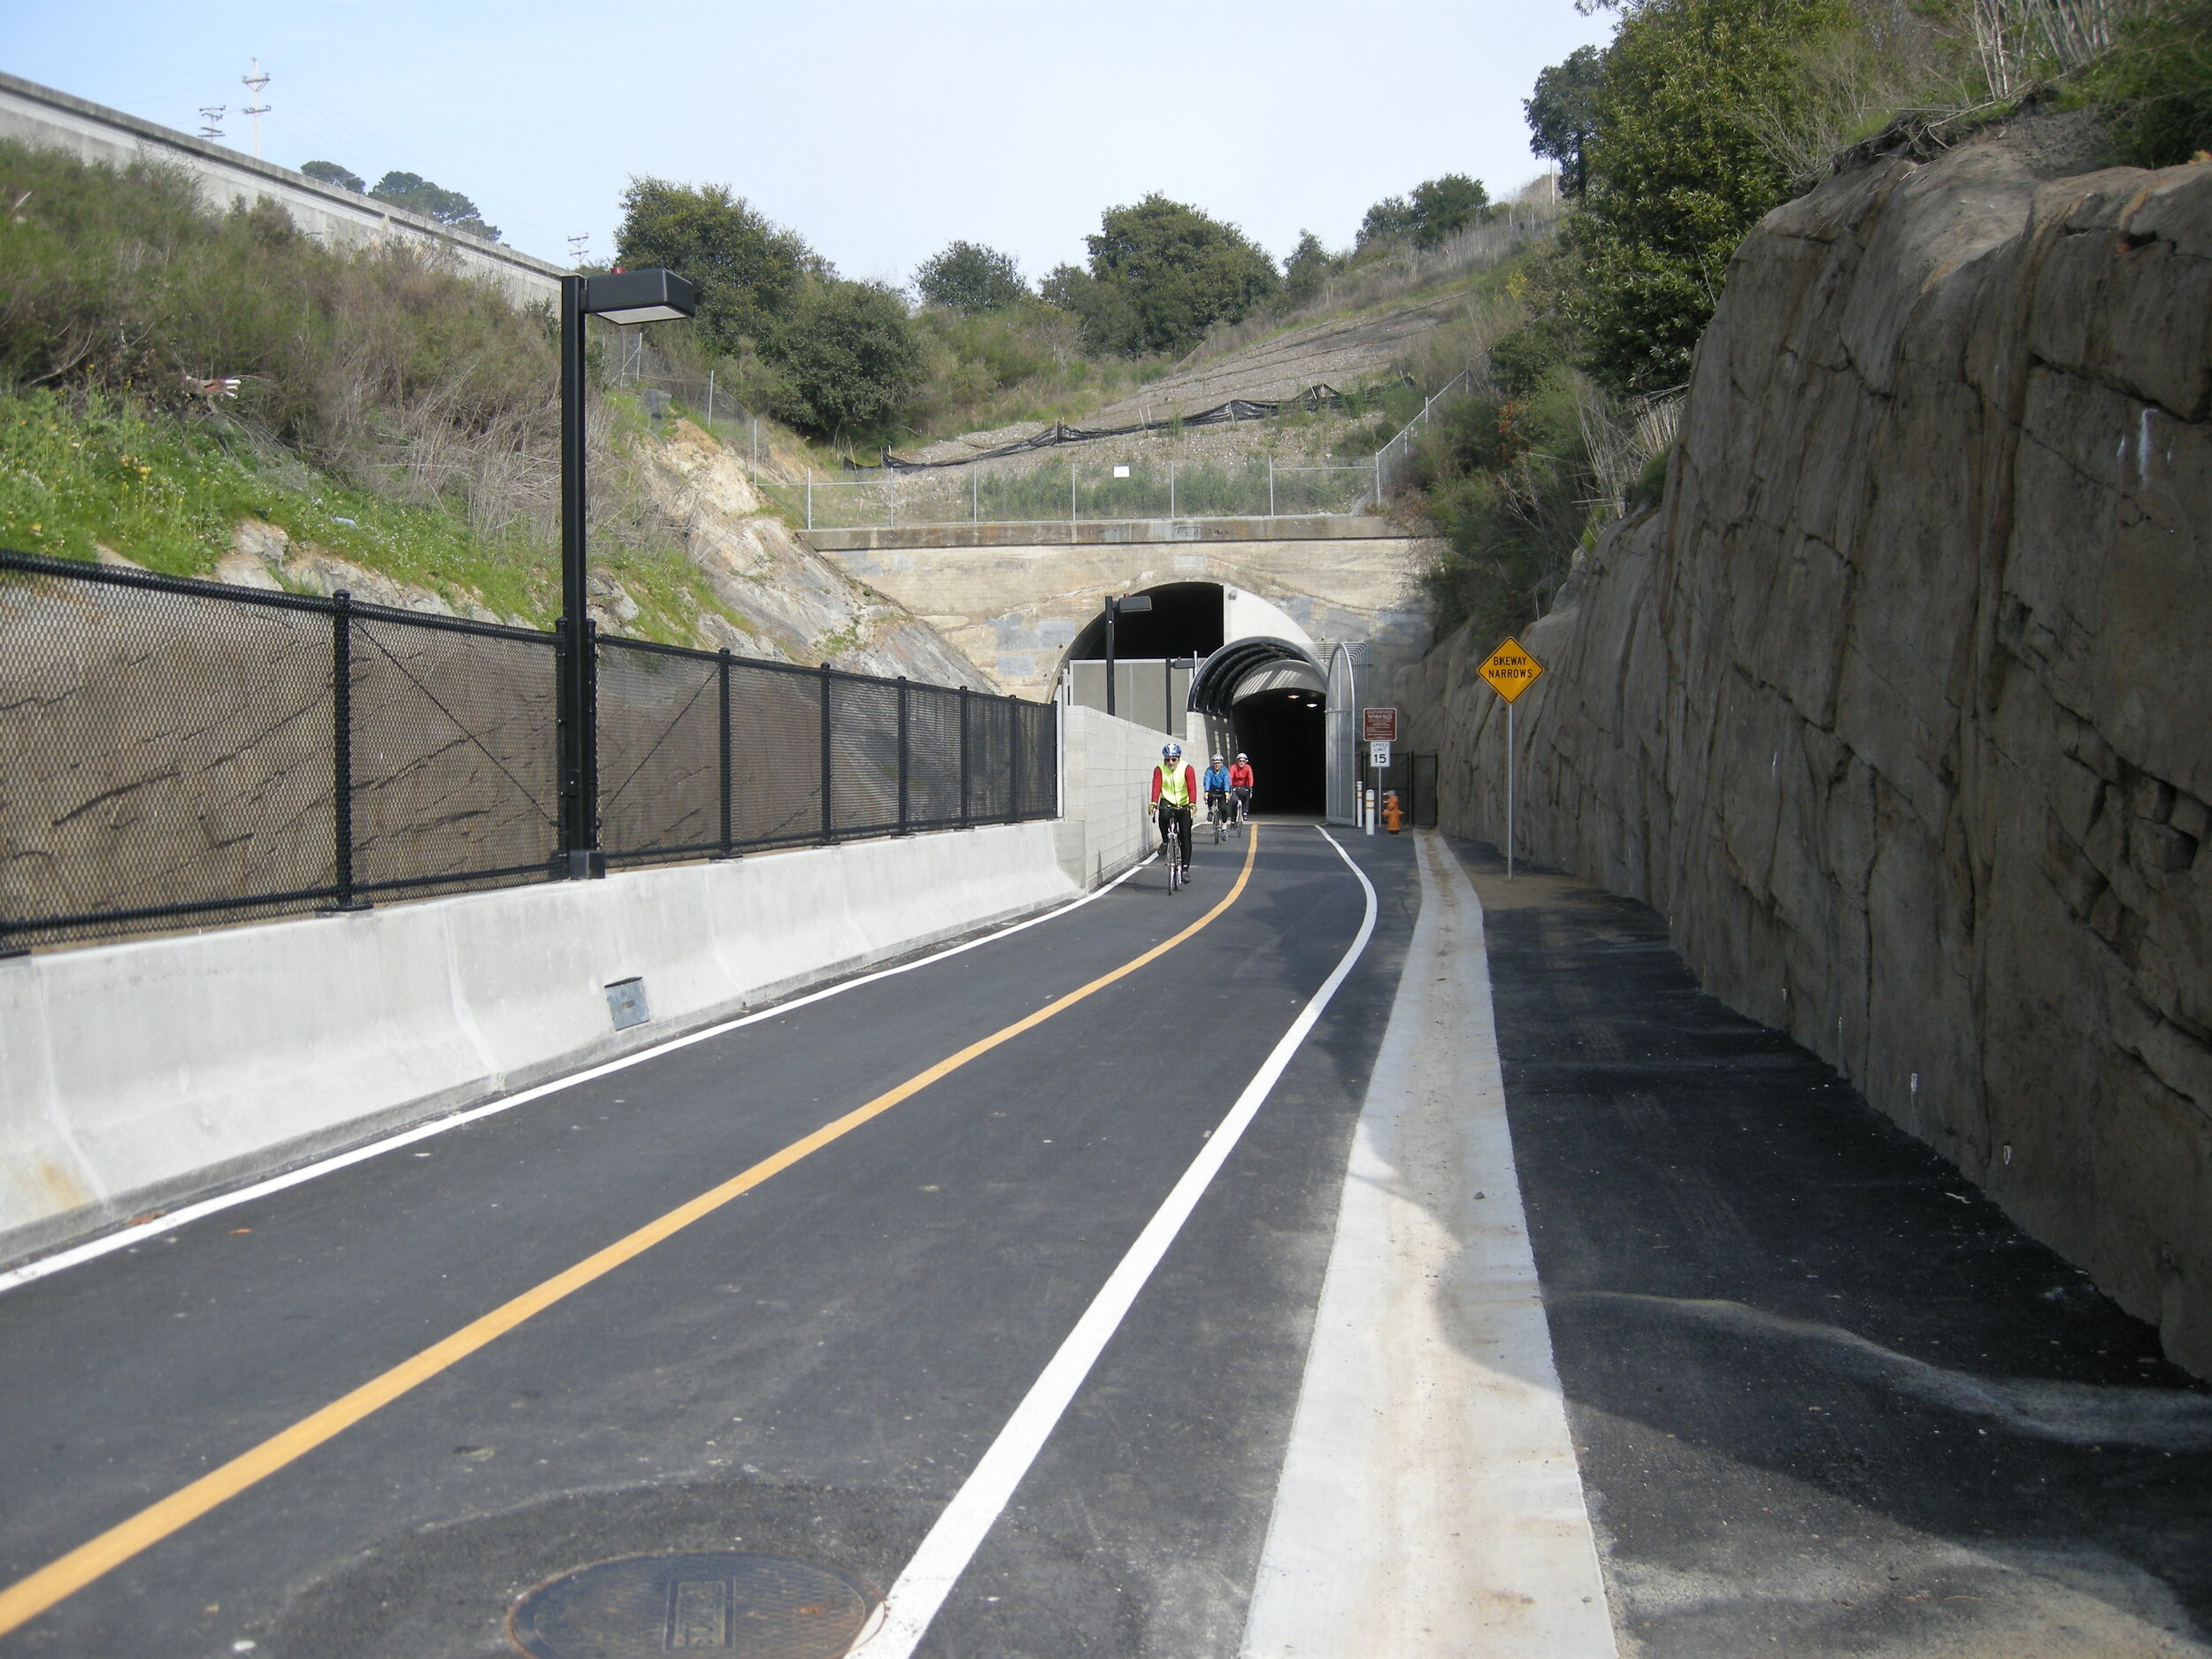 I'd sometimes go through this tunnel.  We have a marvelous bicycle infrastructure in Marin County due to...